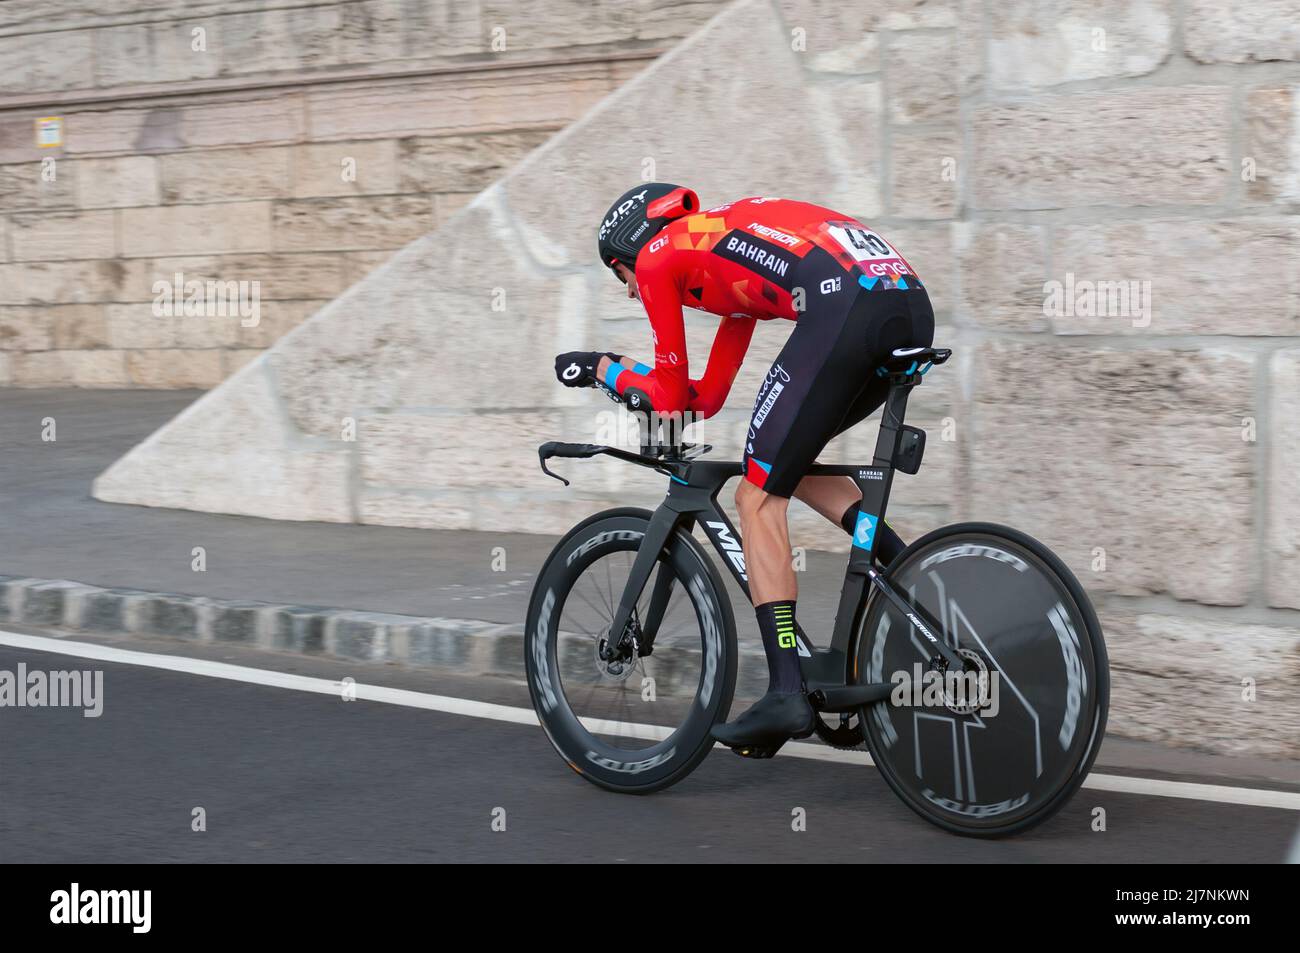 BUDAPEST, HUNGARY - MAY 0-     7, 2022: Pro cyclist Wout Poels BAHRAIN VICTORIOUS Giro D'Italia Stage 2 Time trial - cycling competition on May 07, 20 Stock Photo